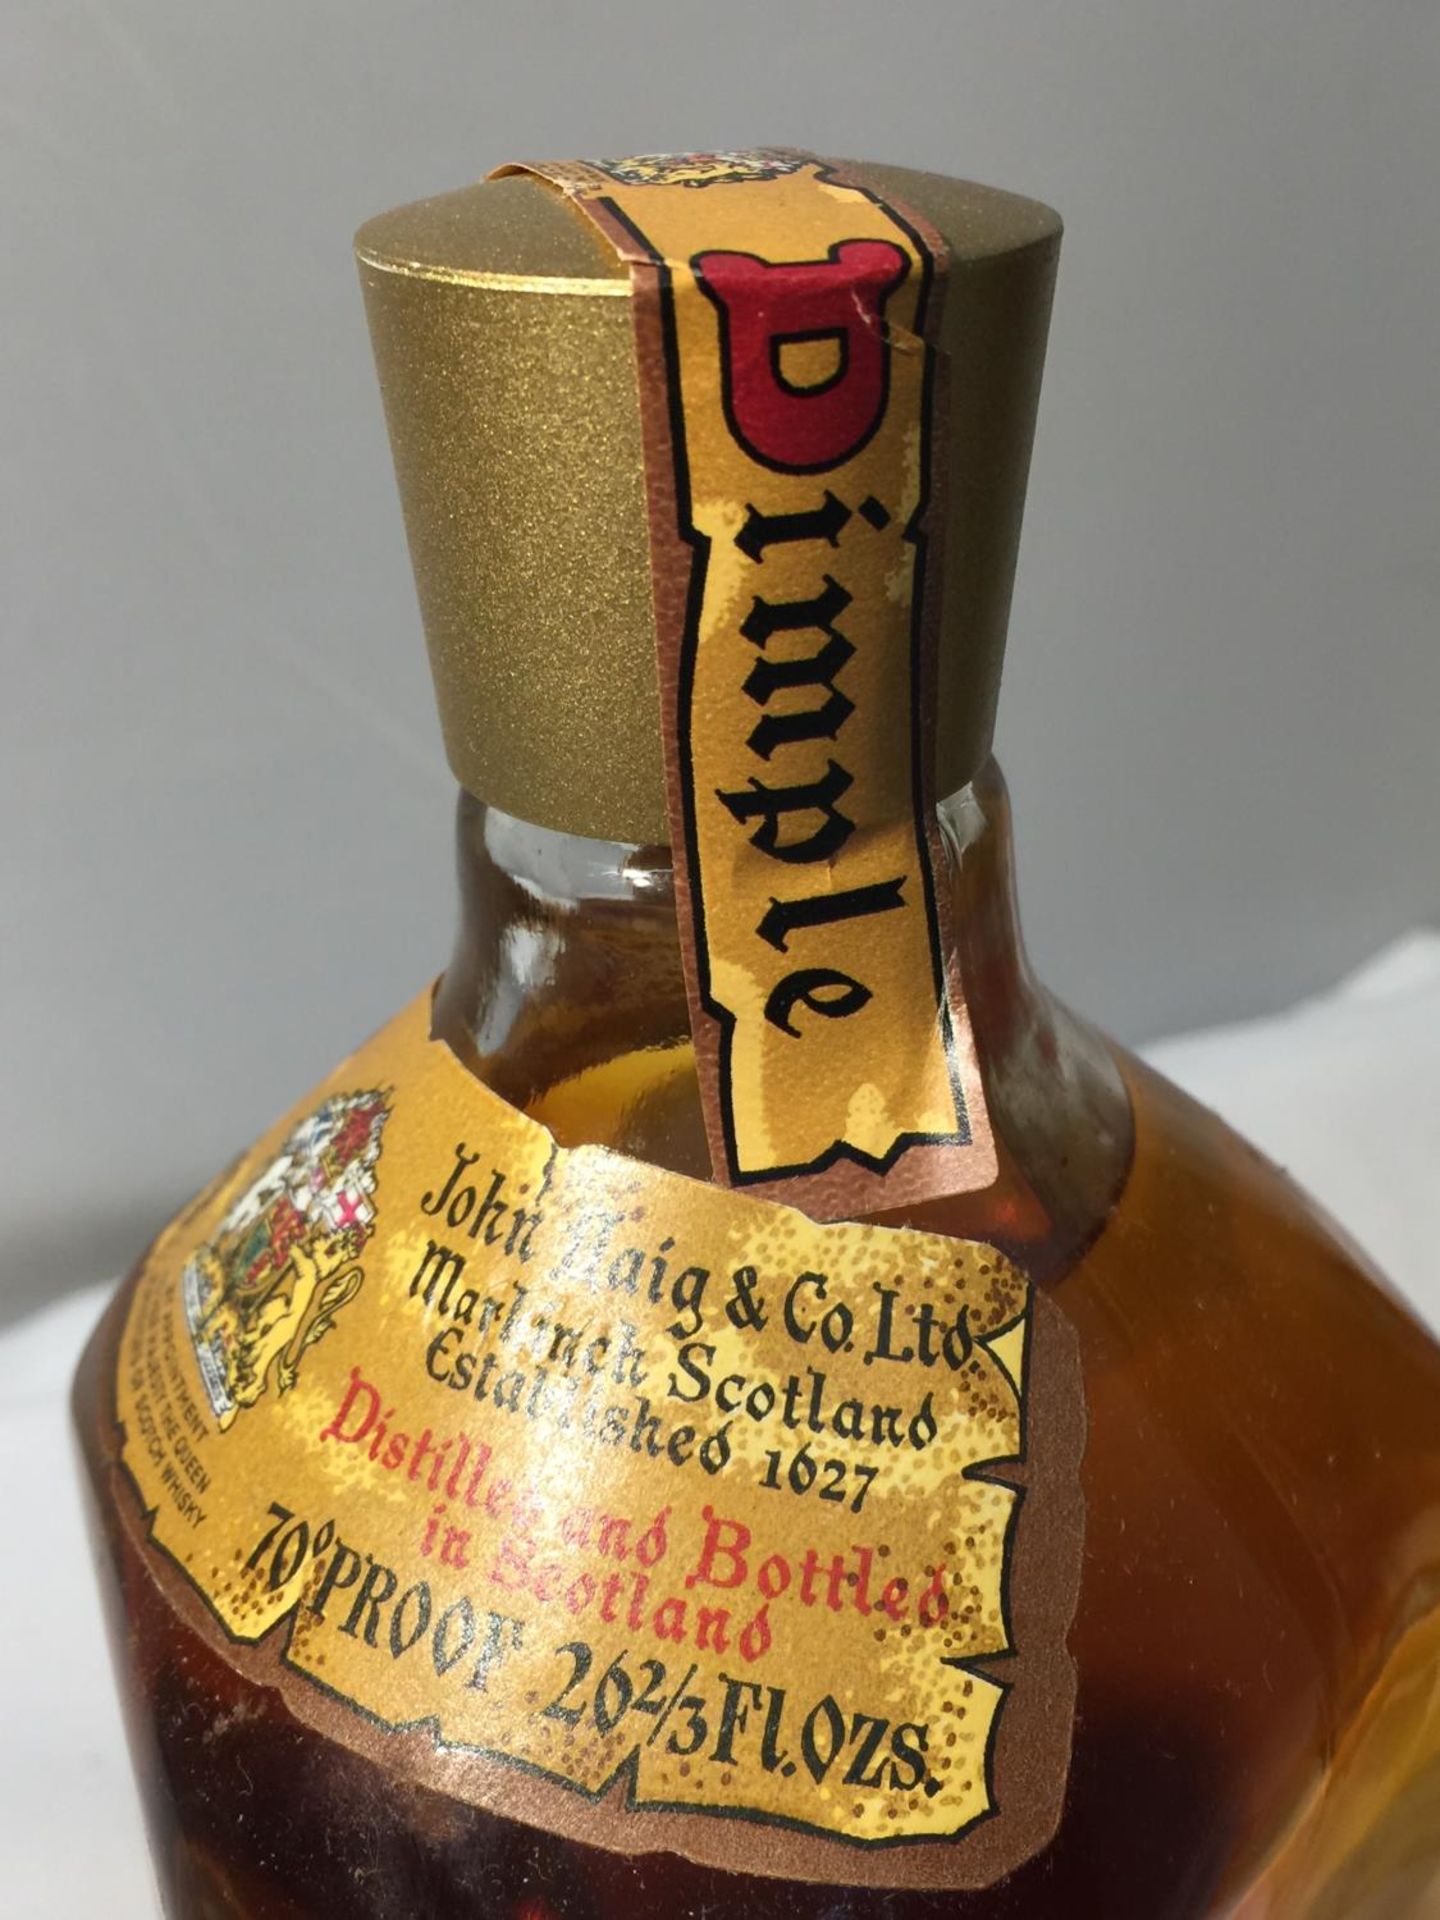 A BOXED DIMPLE DE LUXE SCOTCH WHISKY 70 PROOF 26 2/3 FL.OZS. PROCEEDS TO BE DONATED TO EAST CHESHIRE - Image 3 of 4